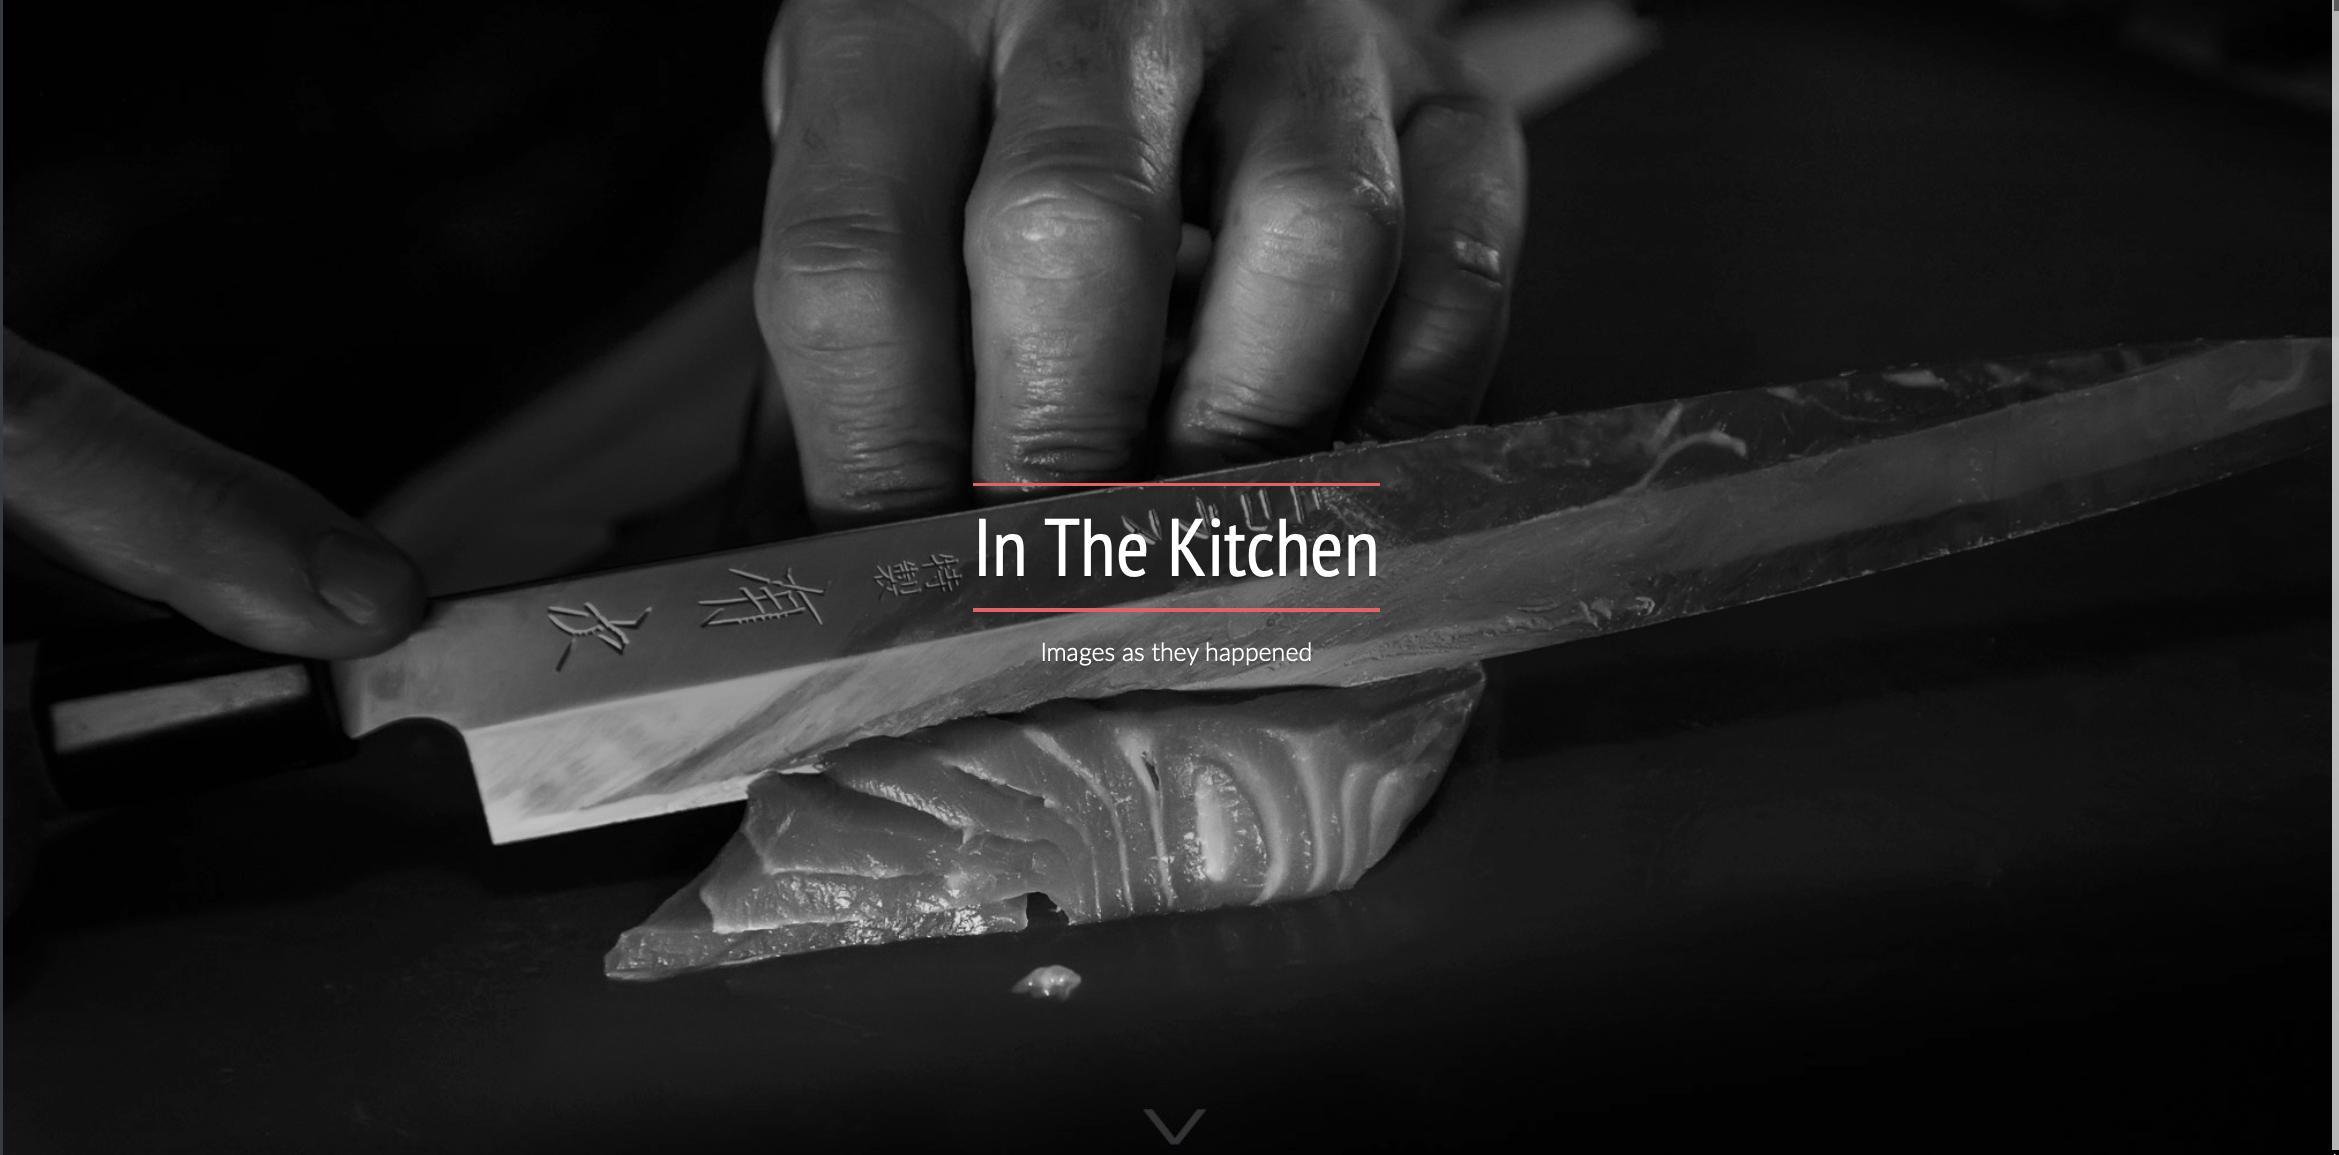 Click to to go "In The Kitchen"